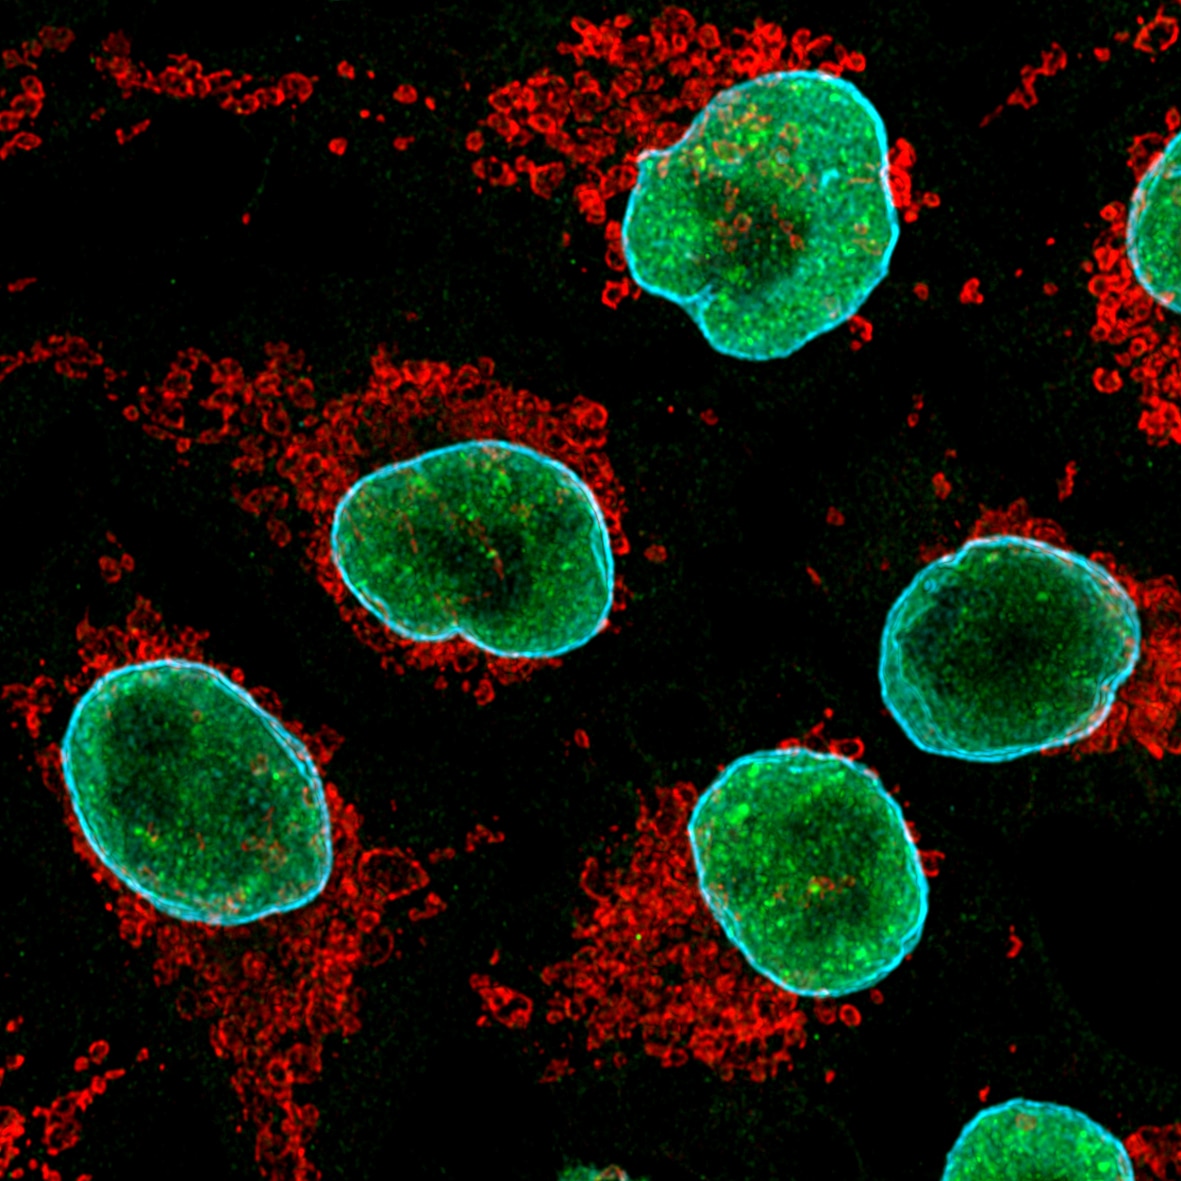 Immunofluorescence of HeLa: PFA-fixed HeLa cells were stained with anti-TDP43 antibody (11802-1-AP) labeled with FlexAble CoraLite Plus 550 Kit (KFA002, red) and
                                                                             anti-Lamin B1 antibody (12987-1-AP) labeled with FlexAble CoraLite Plus 650 Kit (KFA003, cyan). Confocal images were acquired with a 100x oil objective and post-processed. Images were recorded at the Core Facility Bioimaging at the Biomedical Center, LMU Munich.
                                                                             